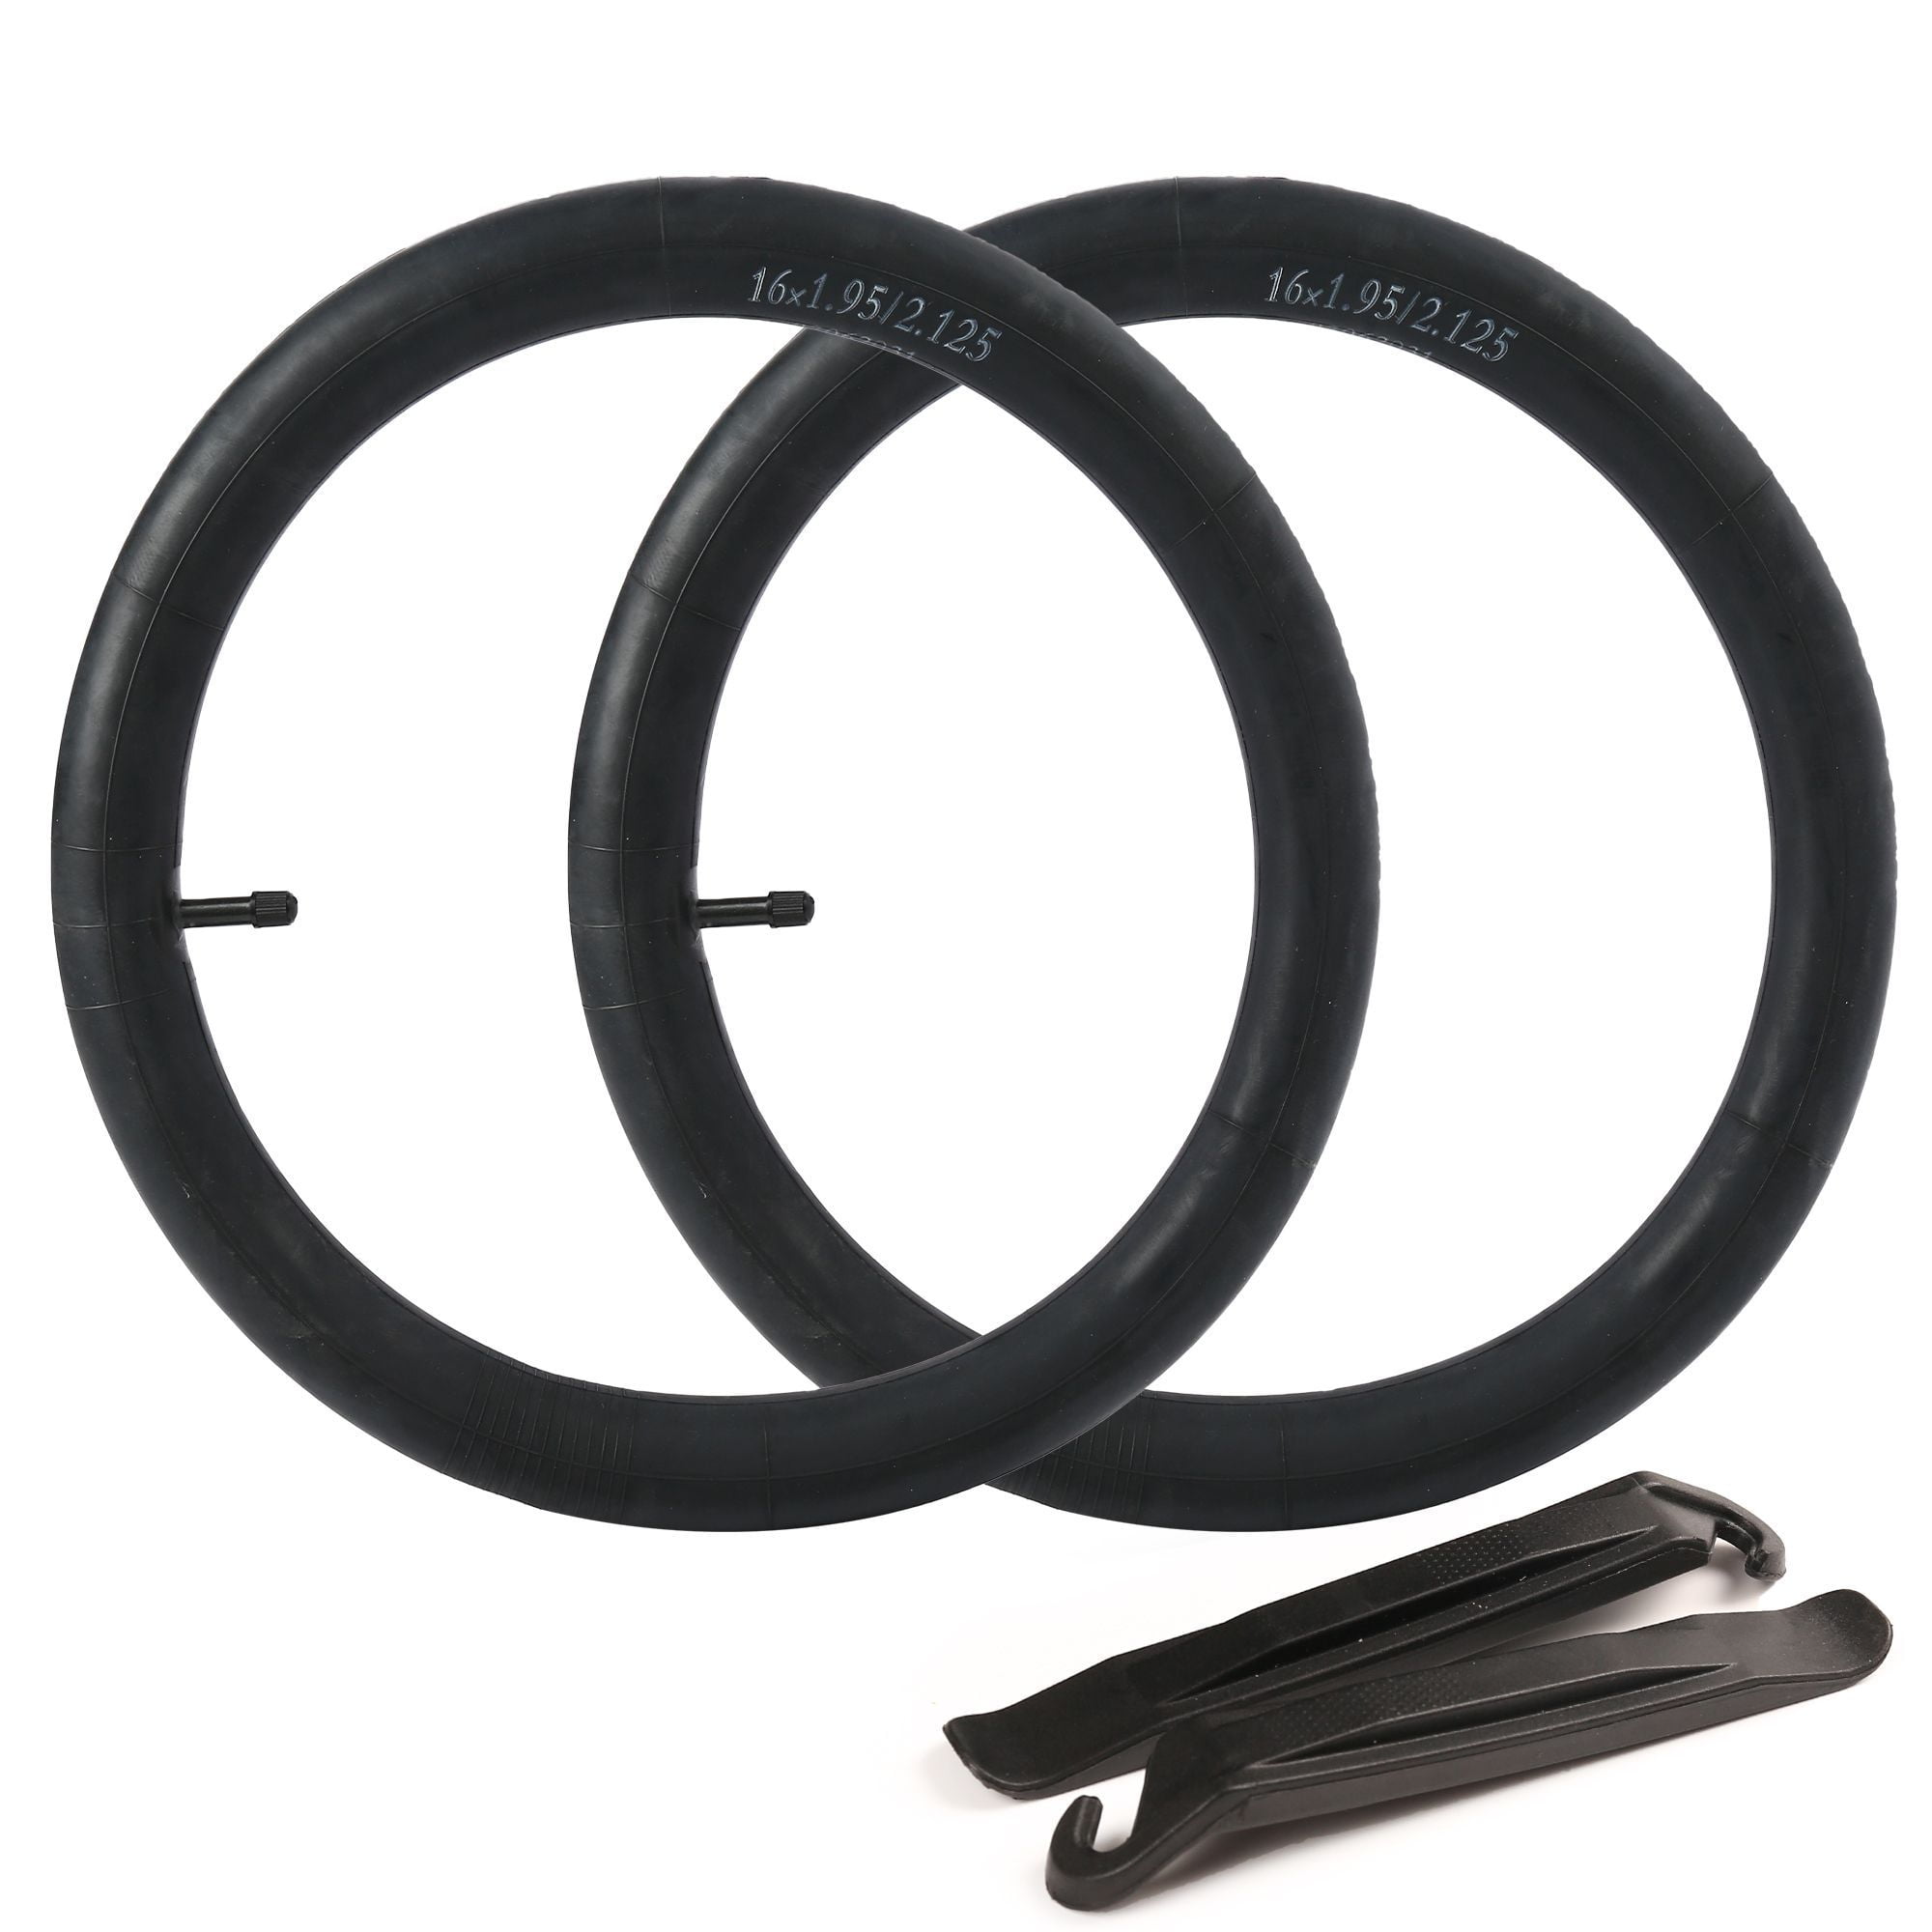 2 x 16" inch Bike Inner Tube 16 x 1.75-2.125 Bicycle Rubber Tire Interior BMX 